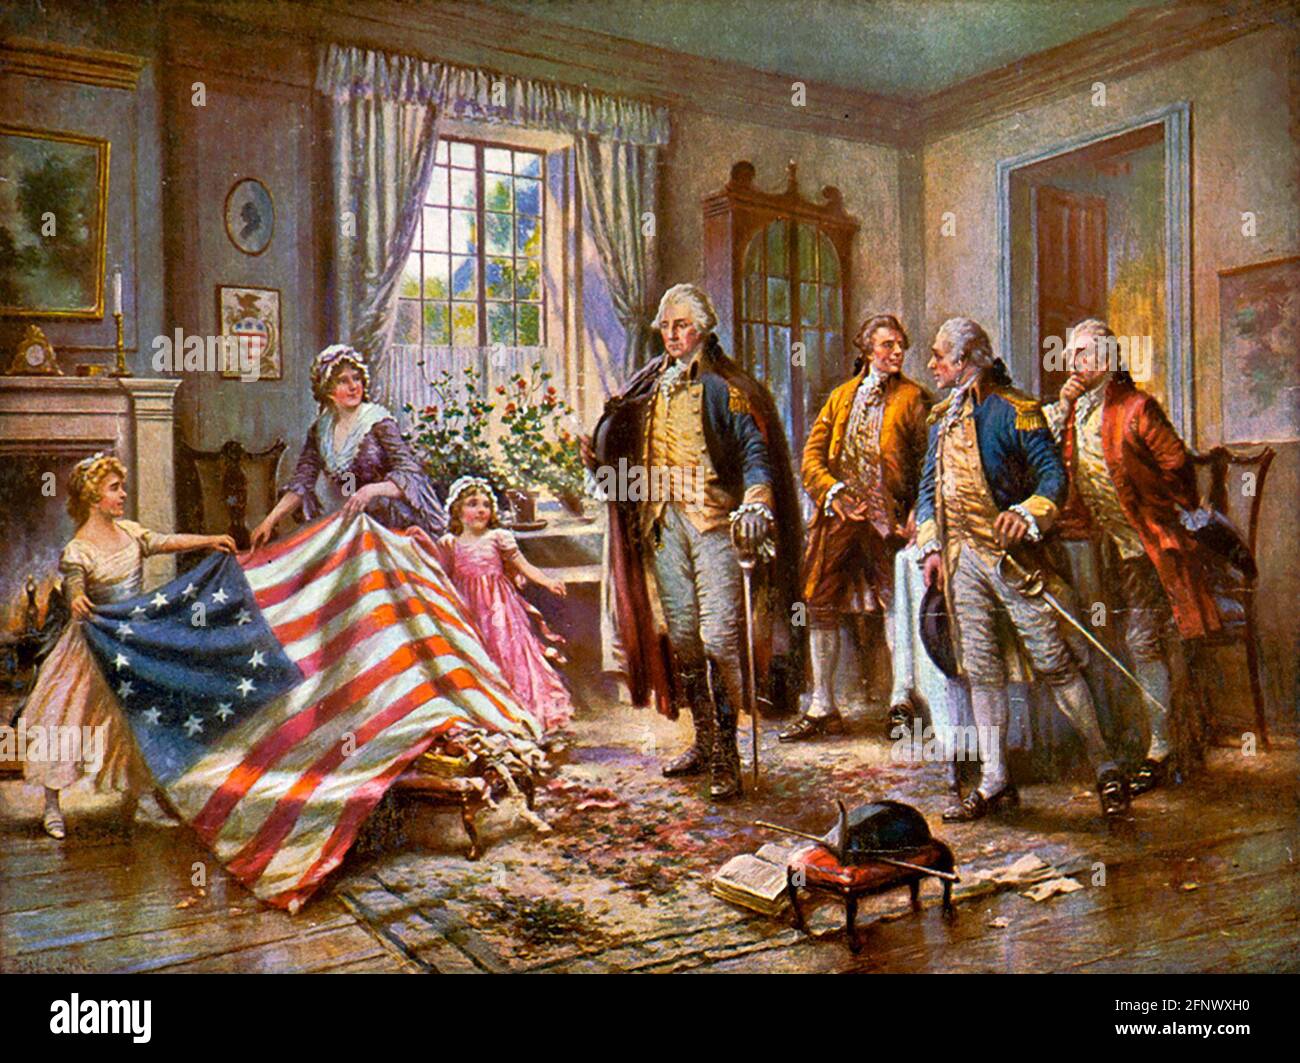 Betsy Ross Flag. The Birth of Old Glory by Pery Moran, 1917. George Washington and other officers look on as Betsy Ross shows her flag. Stock Photo